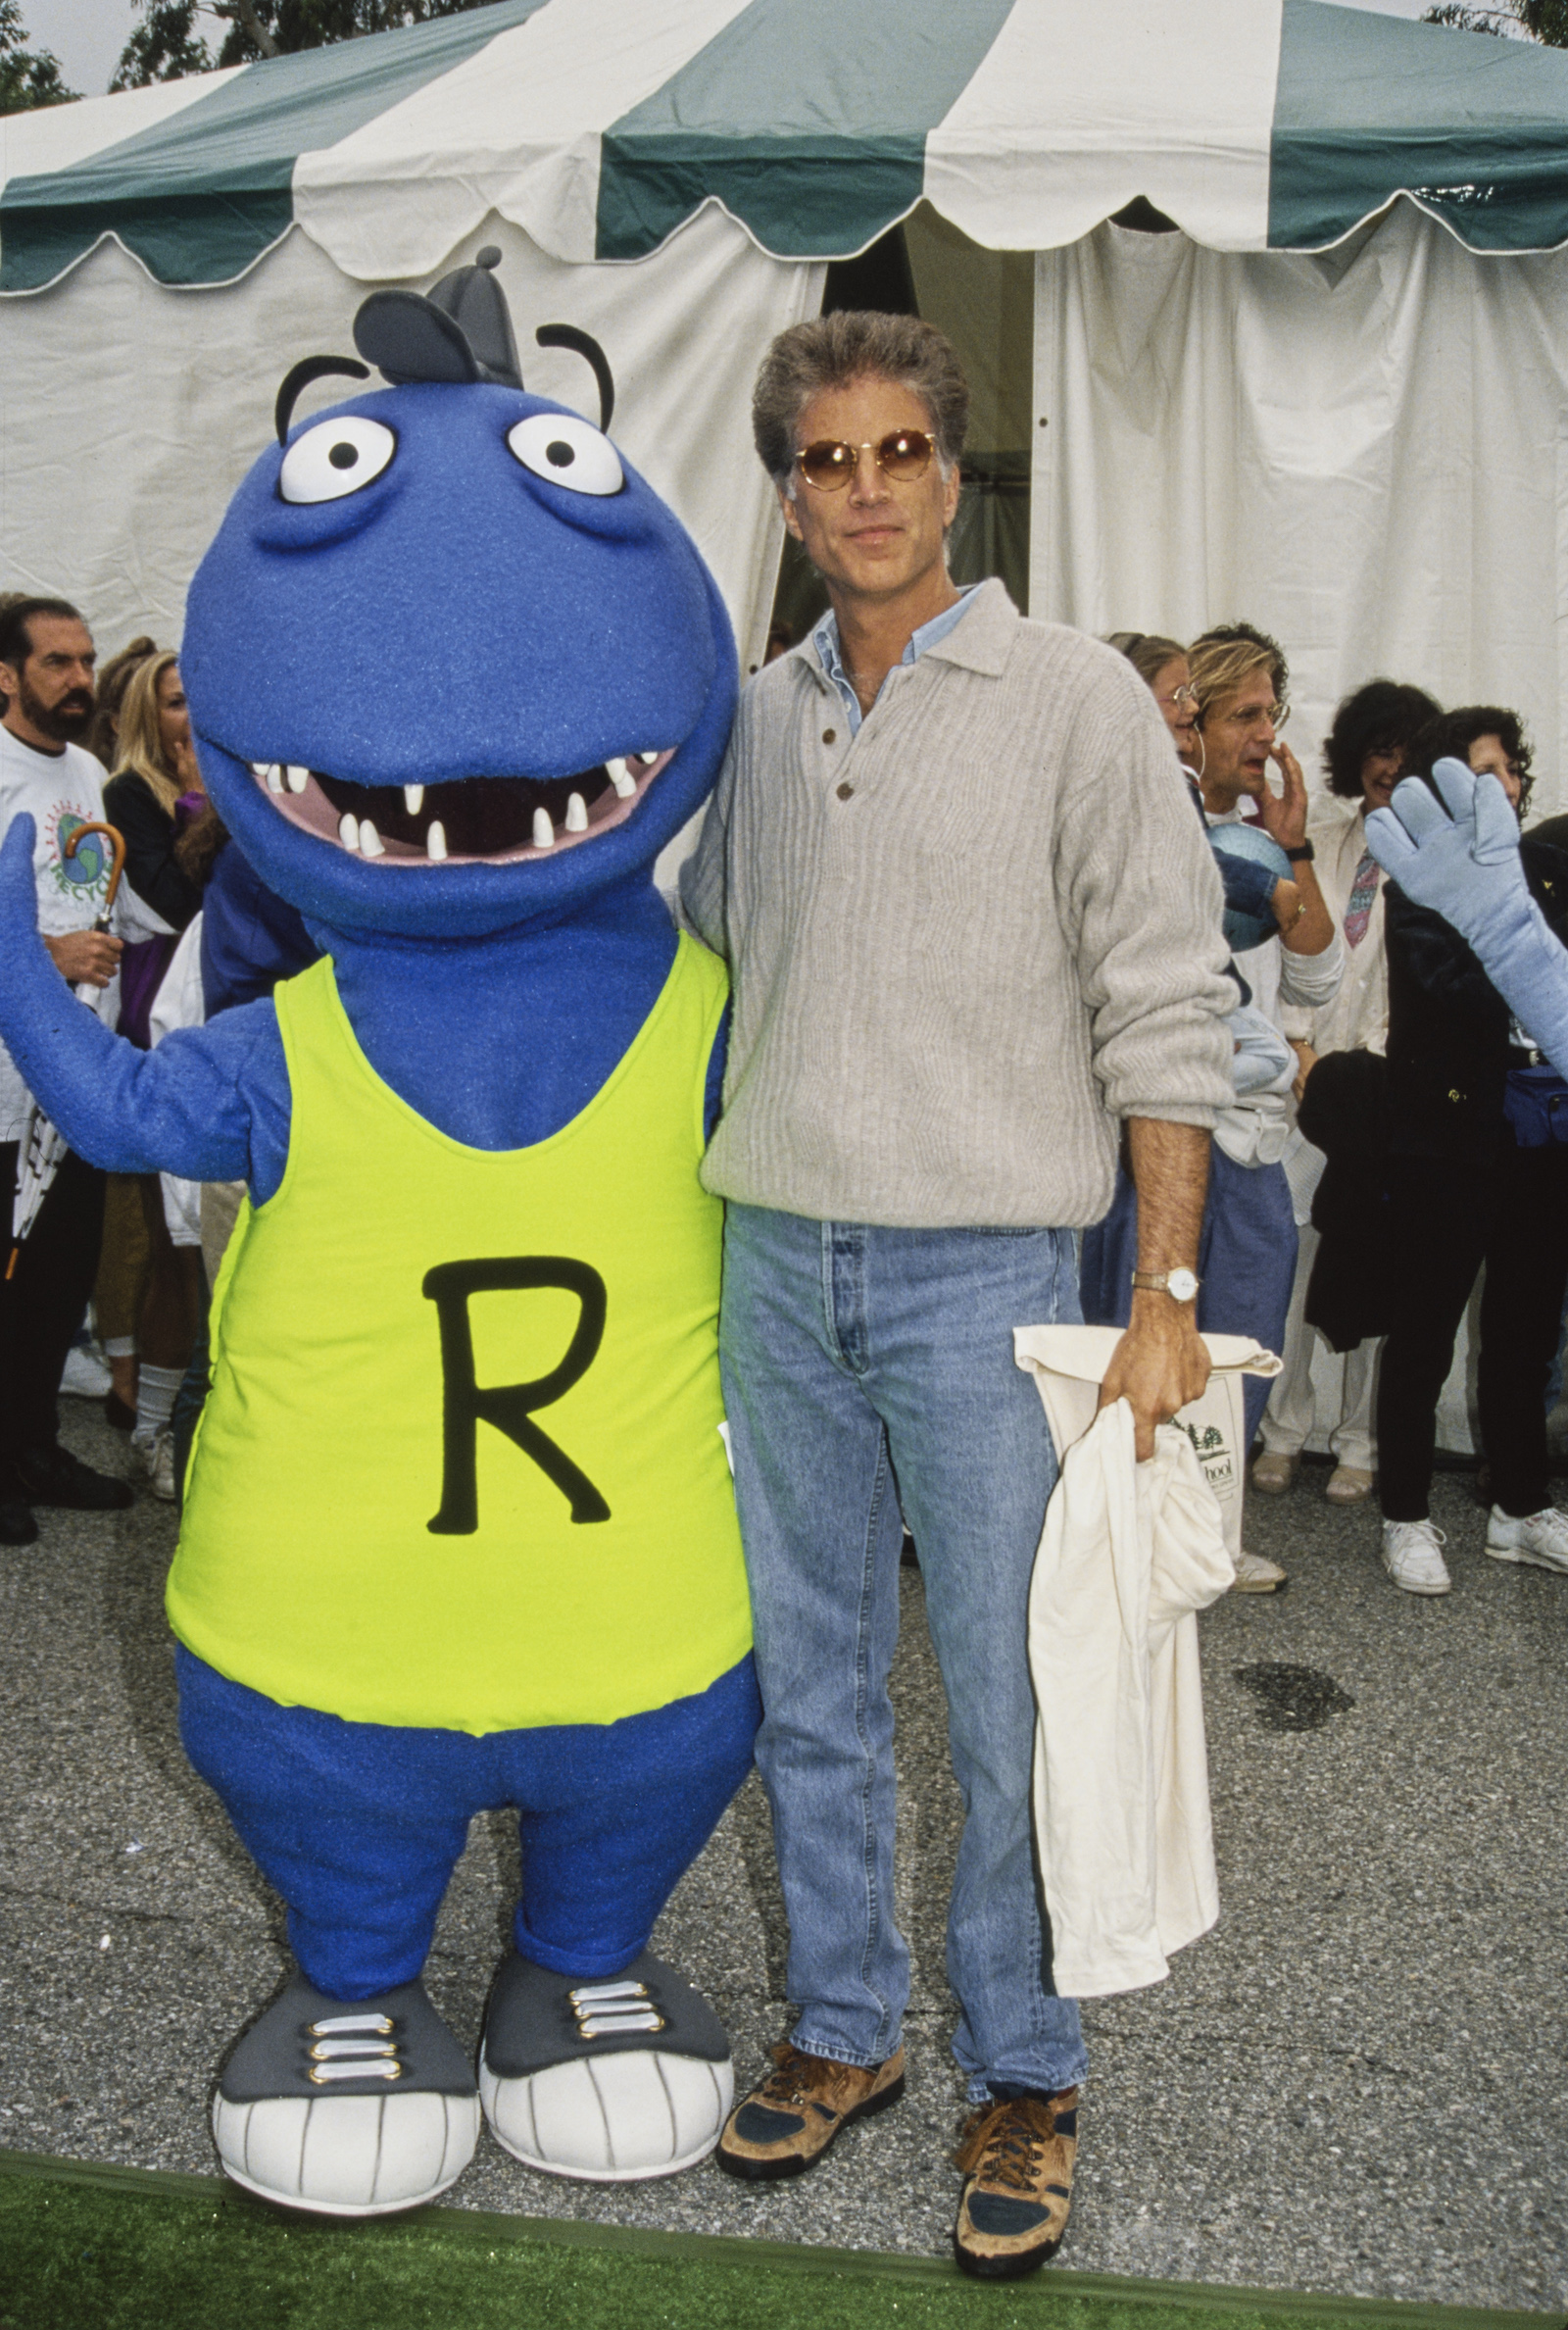 A blue dinosaur mascot with a neon green 'R' shirt next to a tall man in sunglasses